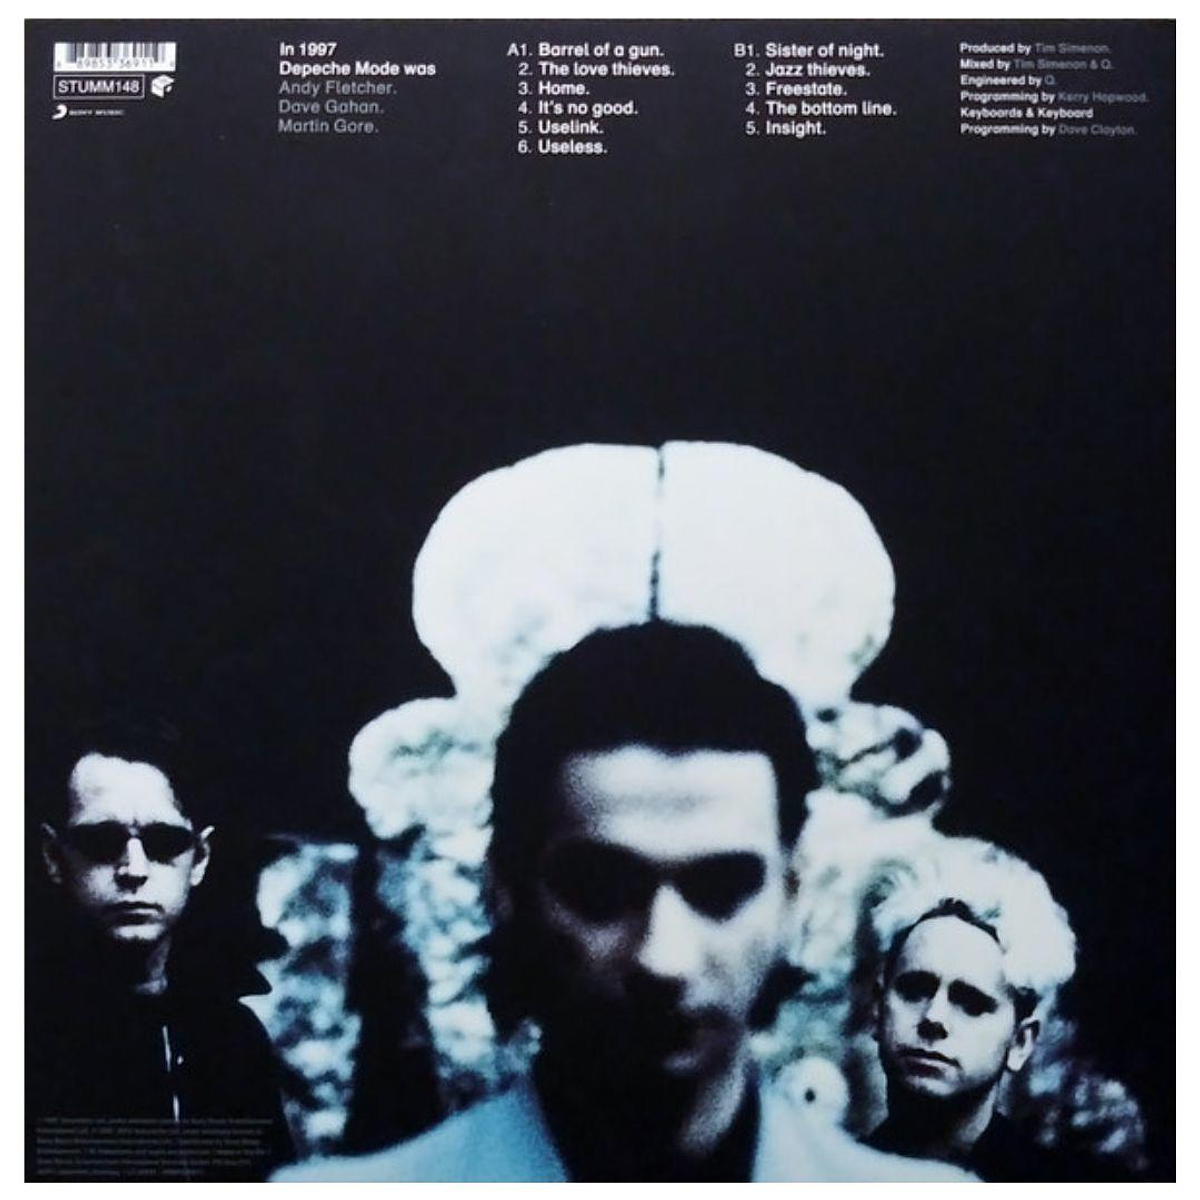 VARIOS – THE MANY FACES OF DEPECHE MODE VINILO 2LP LIMITED 180GR –  Musicland Chile